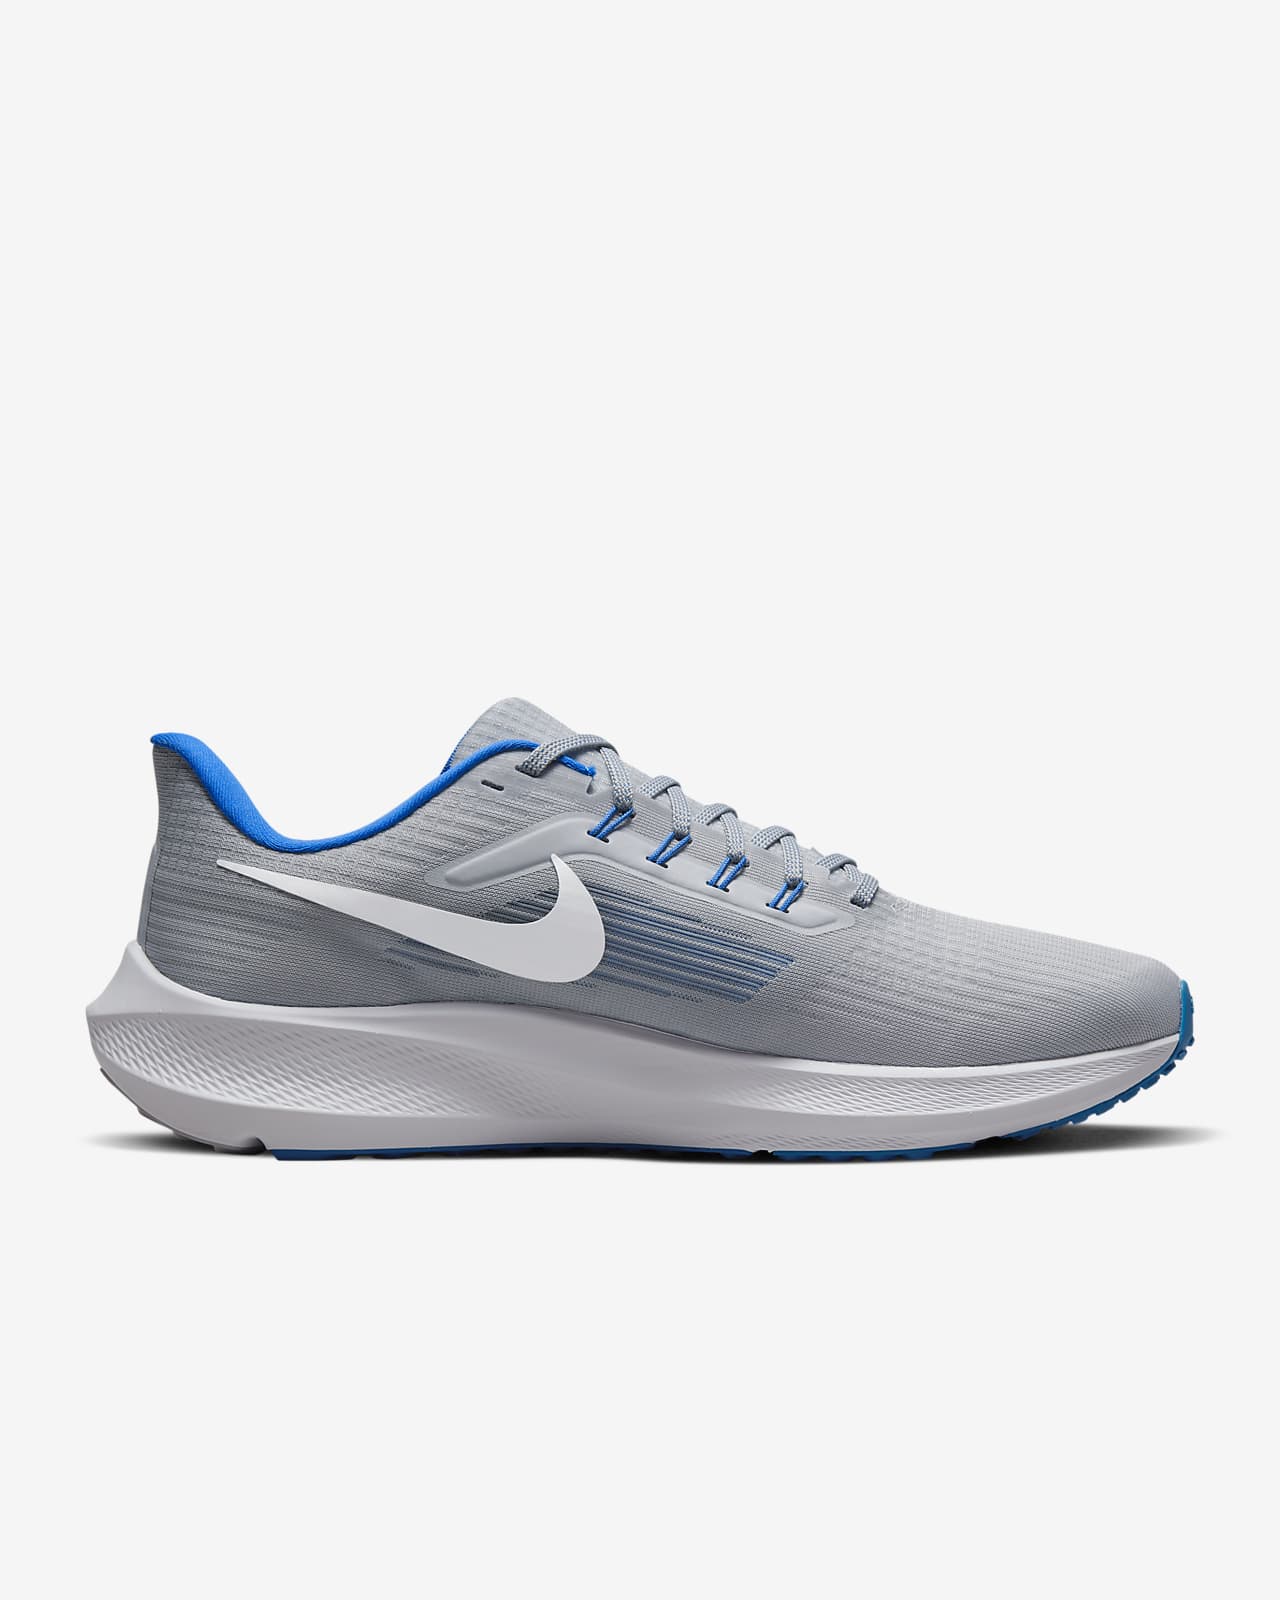 Official NFL Nike Pegasus 39 Shoes, NFL Shoes, Sneakers